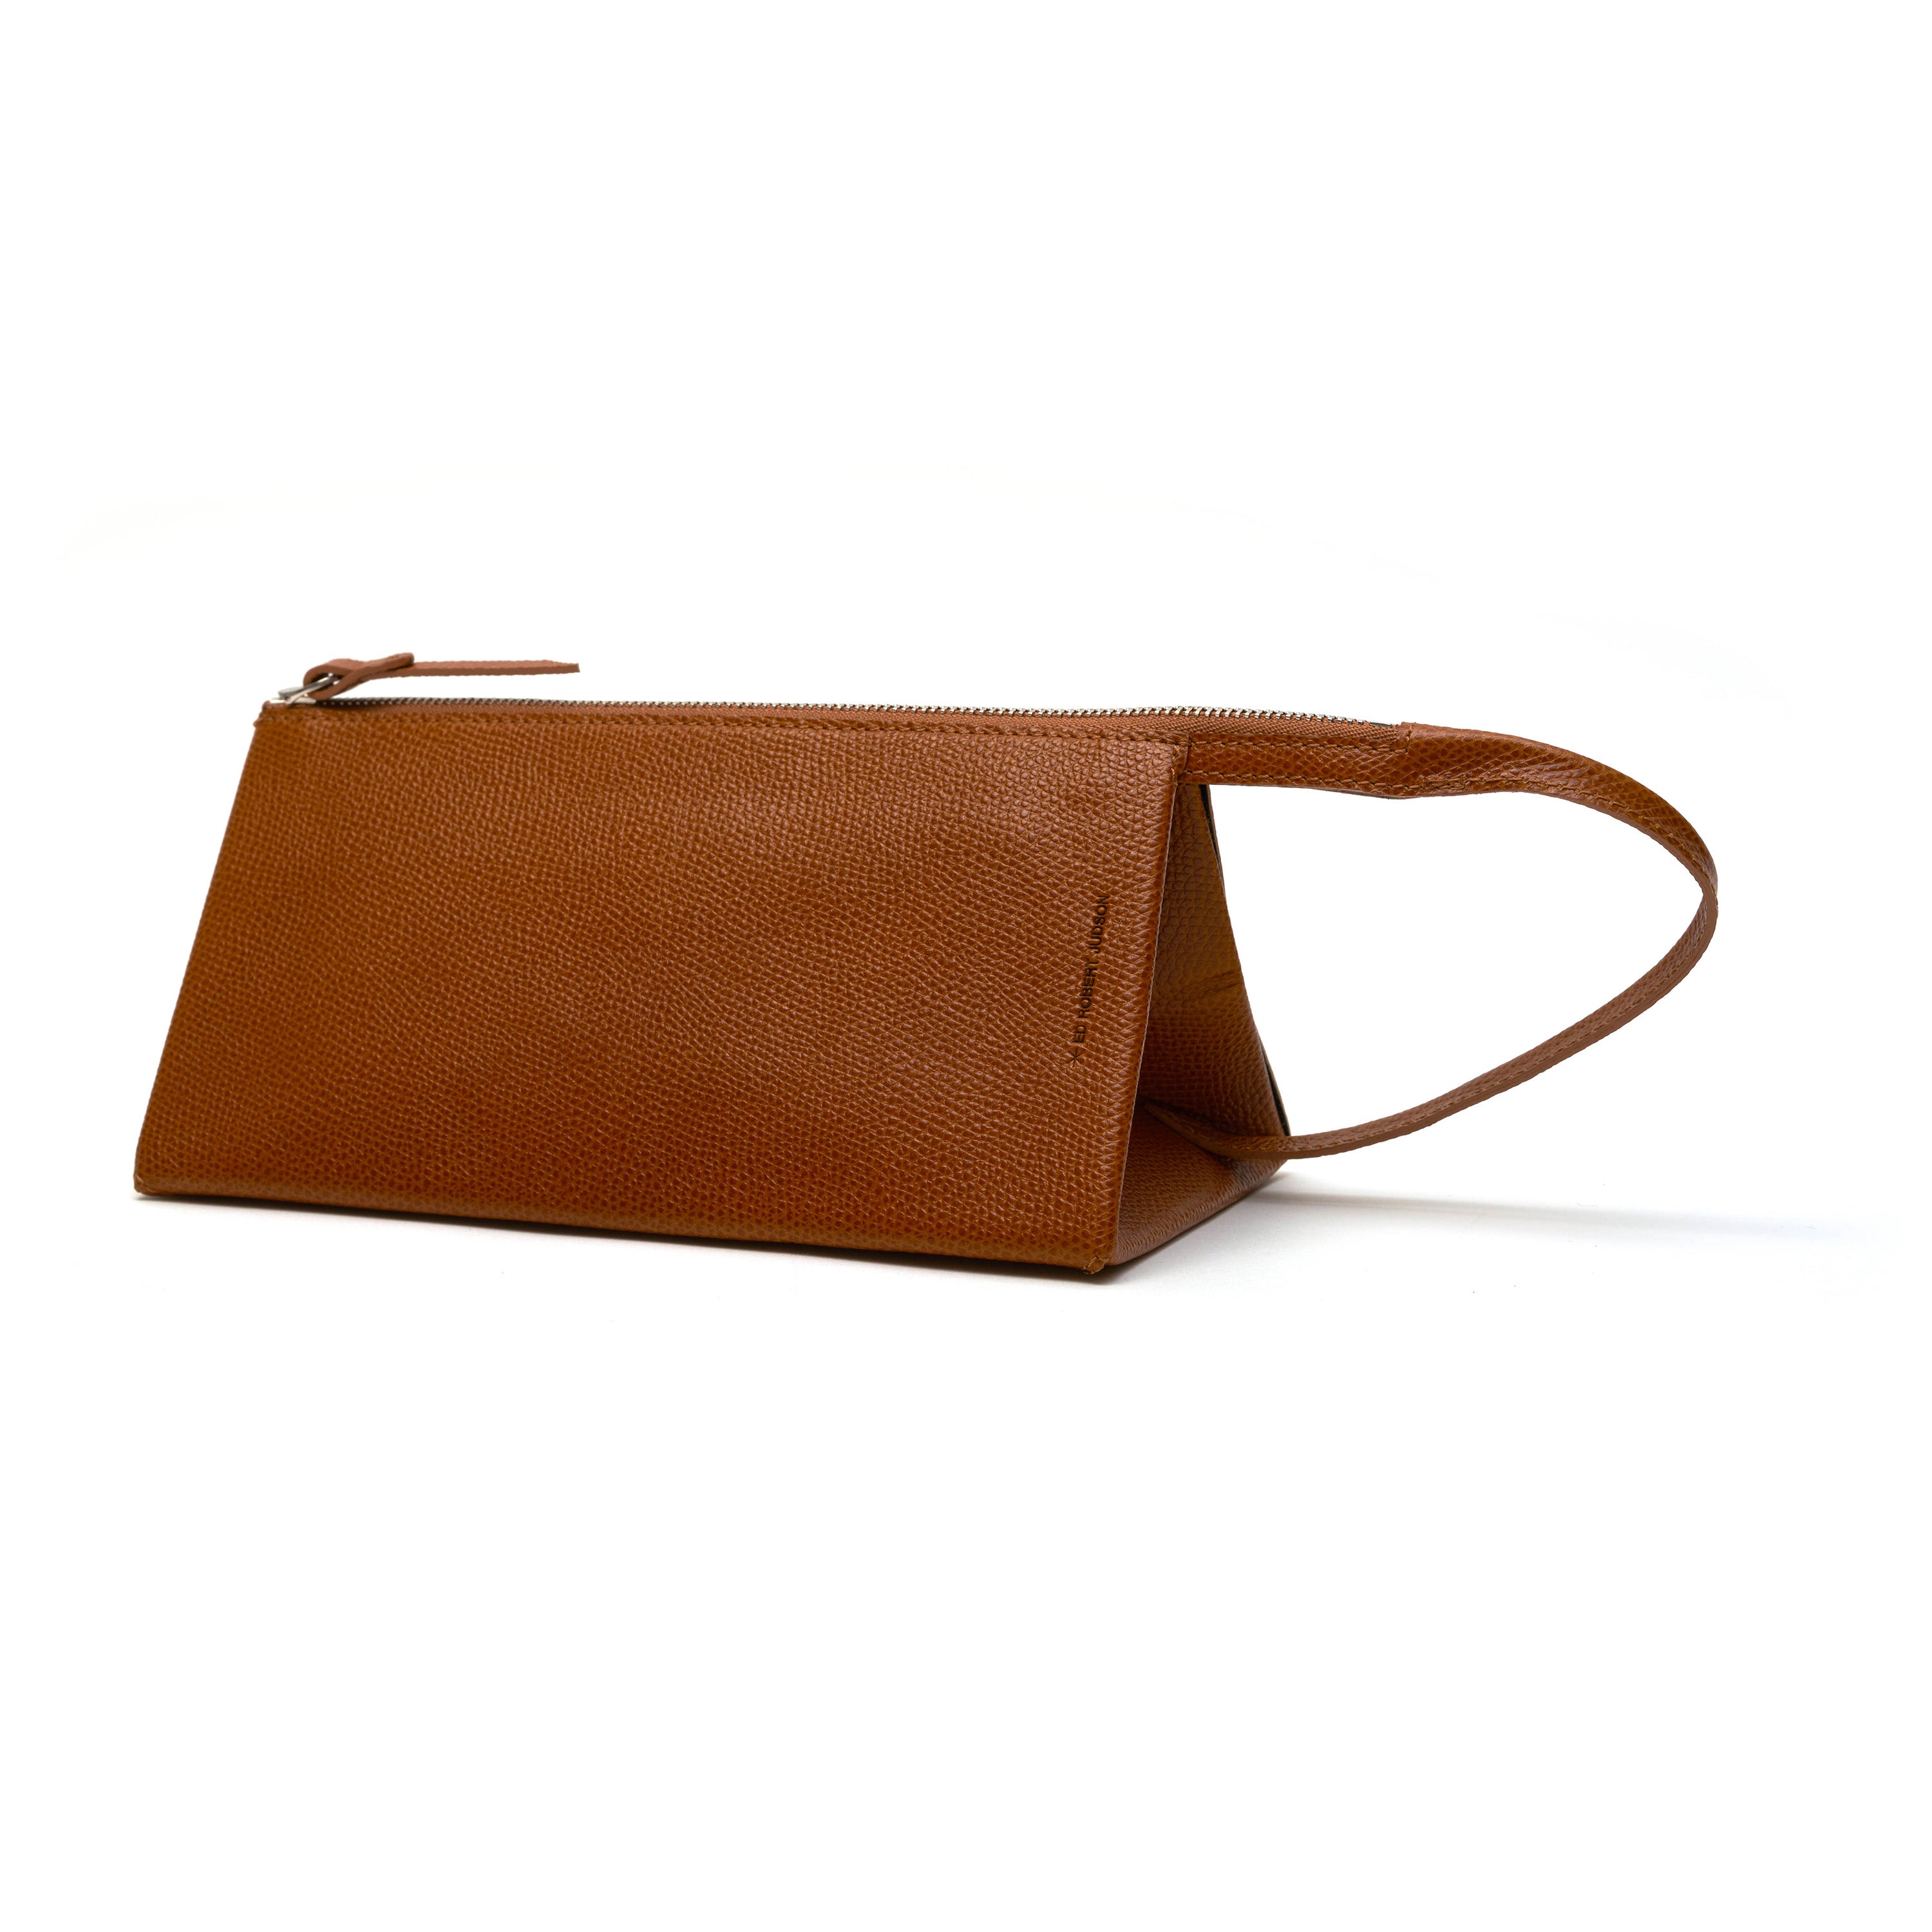 TRICE - 2WAY ENVELOPE POUCH